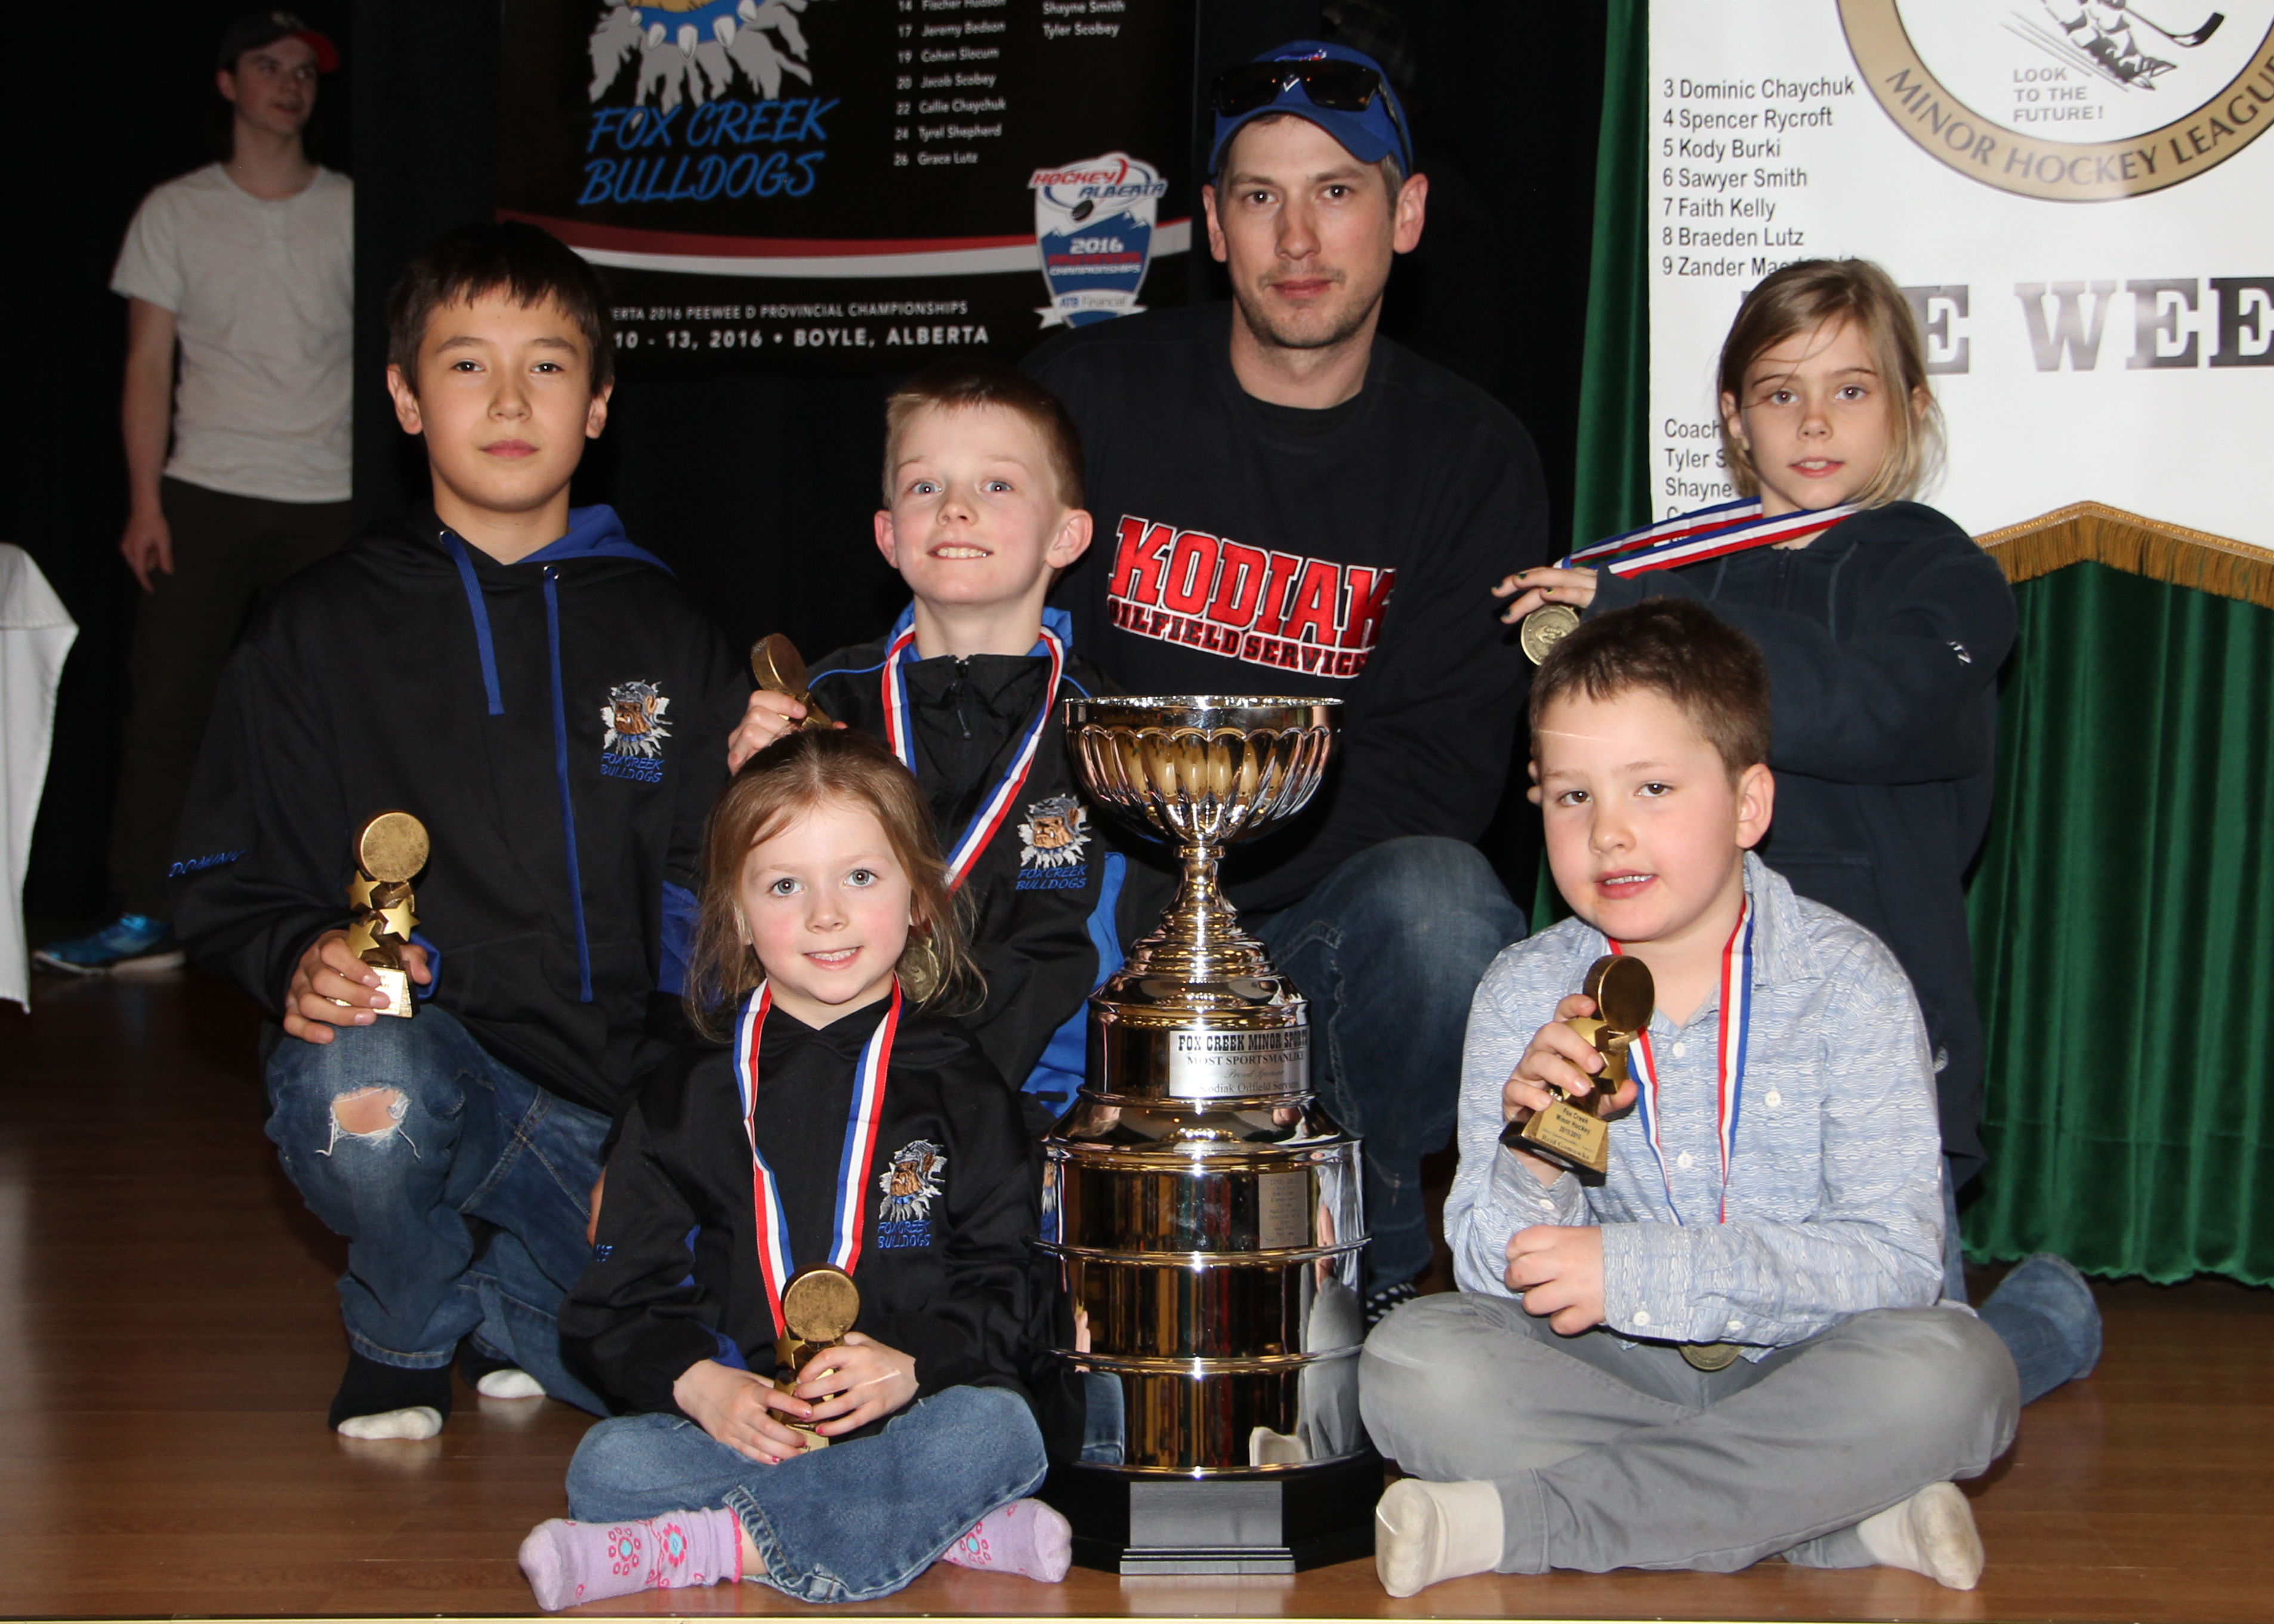 Andrew Slocum, alongside recipients of the Most Sportsmanlike Player Award, sponsored by Kodiak Oilfield Services.